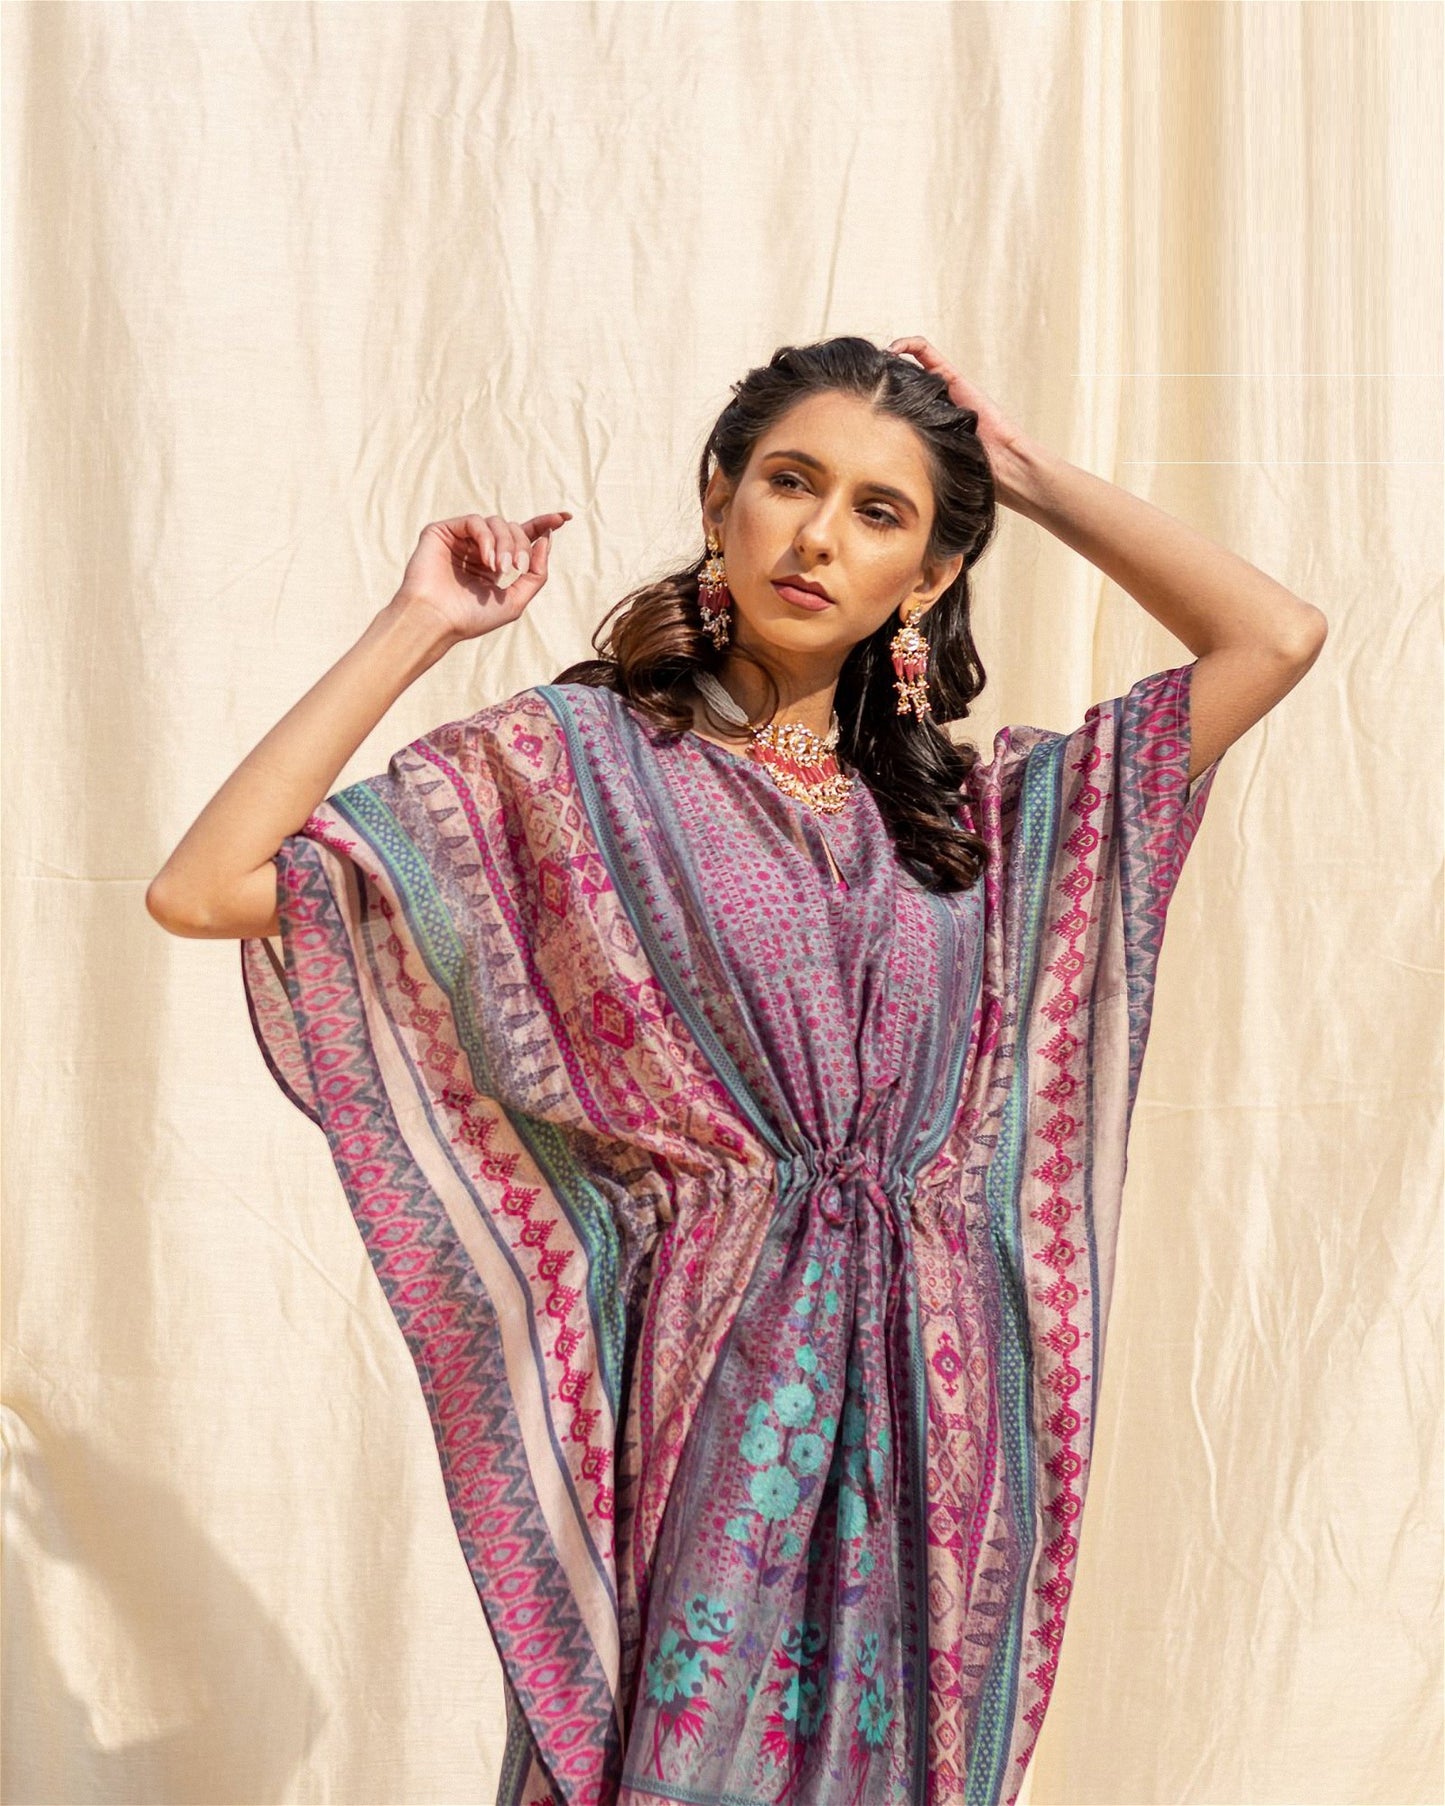 The model in the image is wearing Purple Soft Silk Premium Kaftan from Alice Milan. Crafted with the finest materials and impeccable attention to detail, the Kaftan / Dress looks premium, trendy, luxurious and offers unparalleled comfort. It’s a perfect clothing option for loungewear, resort wear, party wear or for an airport look. The woman in the image looks happy, and confident with her style statement putting a happy smile on her face.